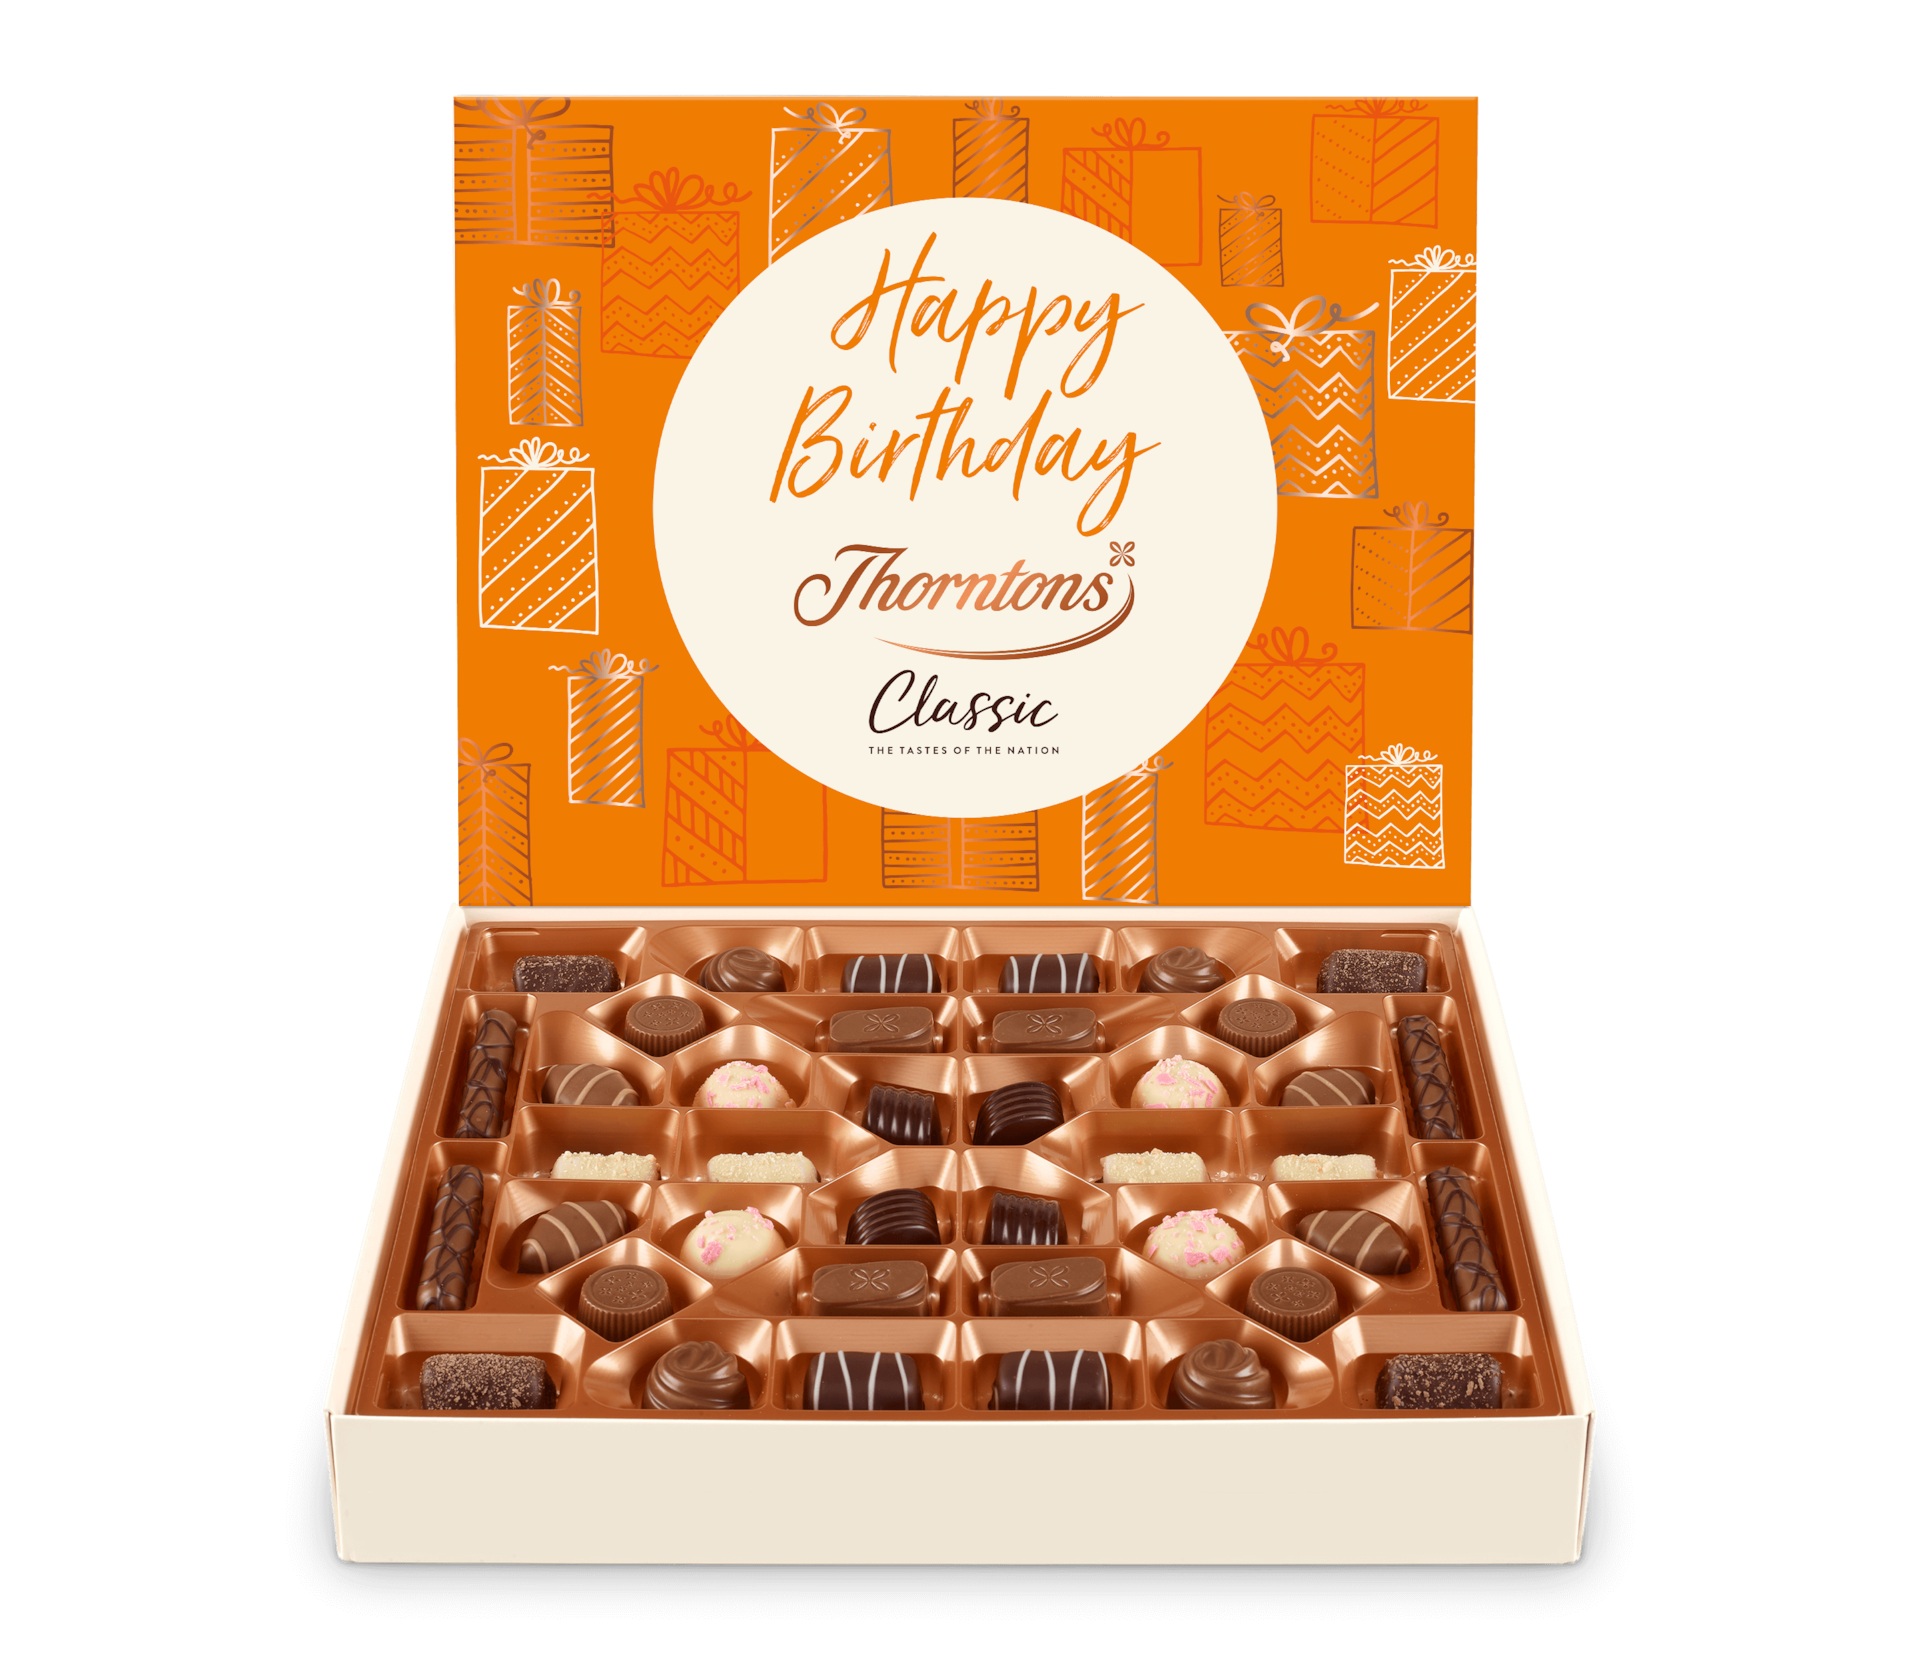 https://www.thorntons.com/medias/sys_master/images/h13/h96/9761153450014/77229504_main_NEW/77229504-main-NEW.png?resize=xs-s-xs